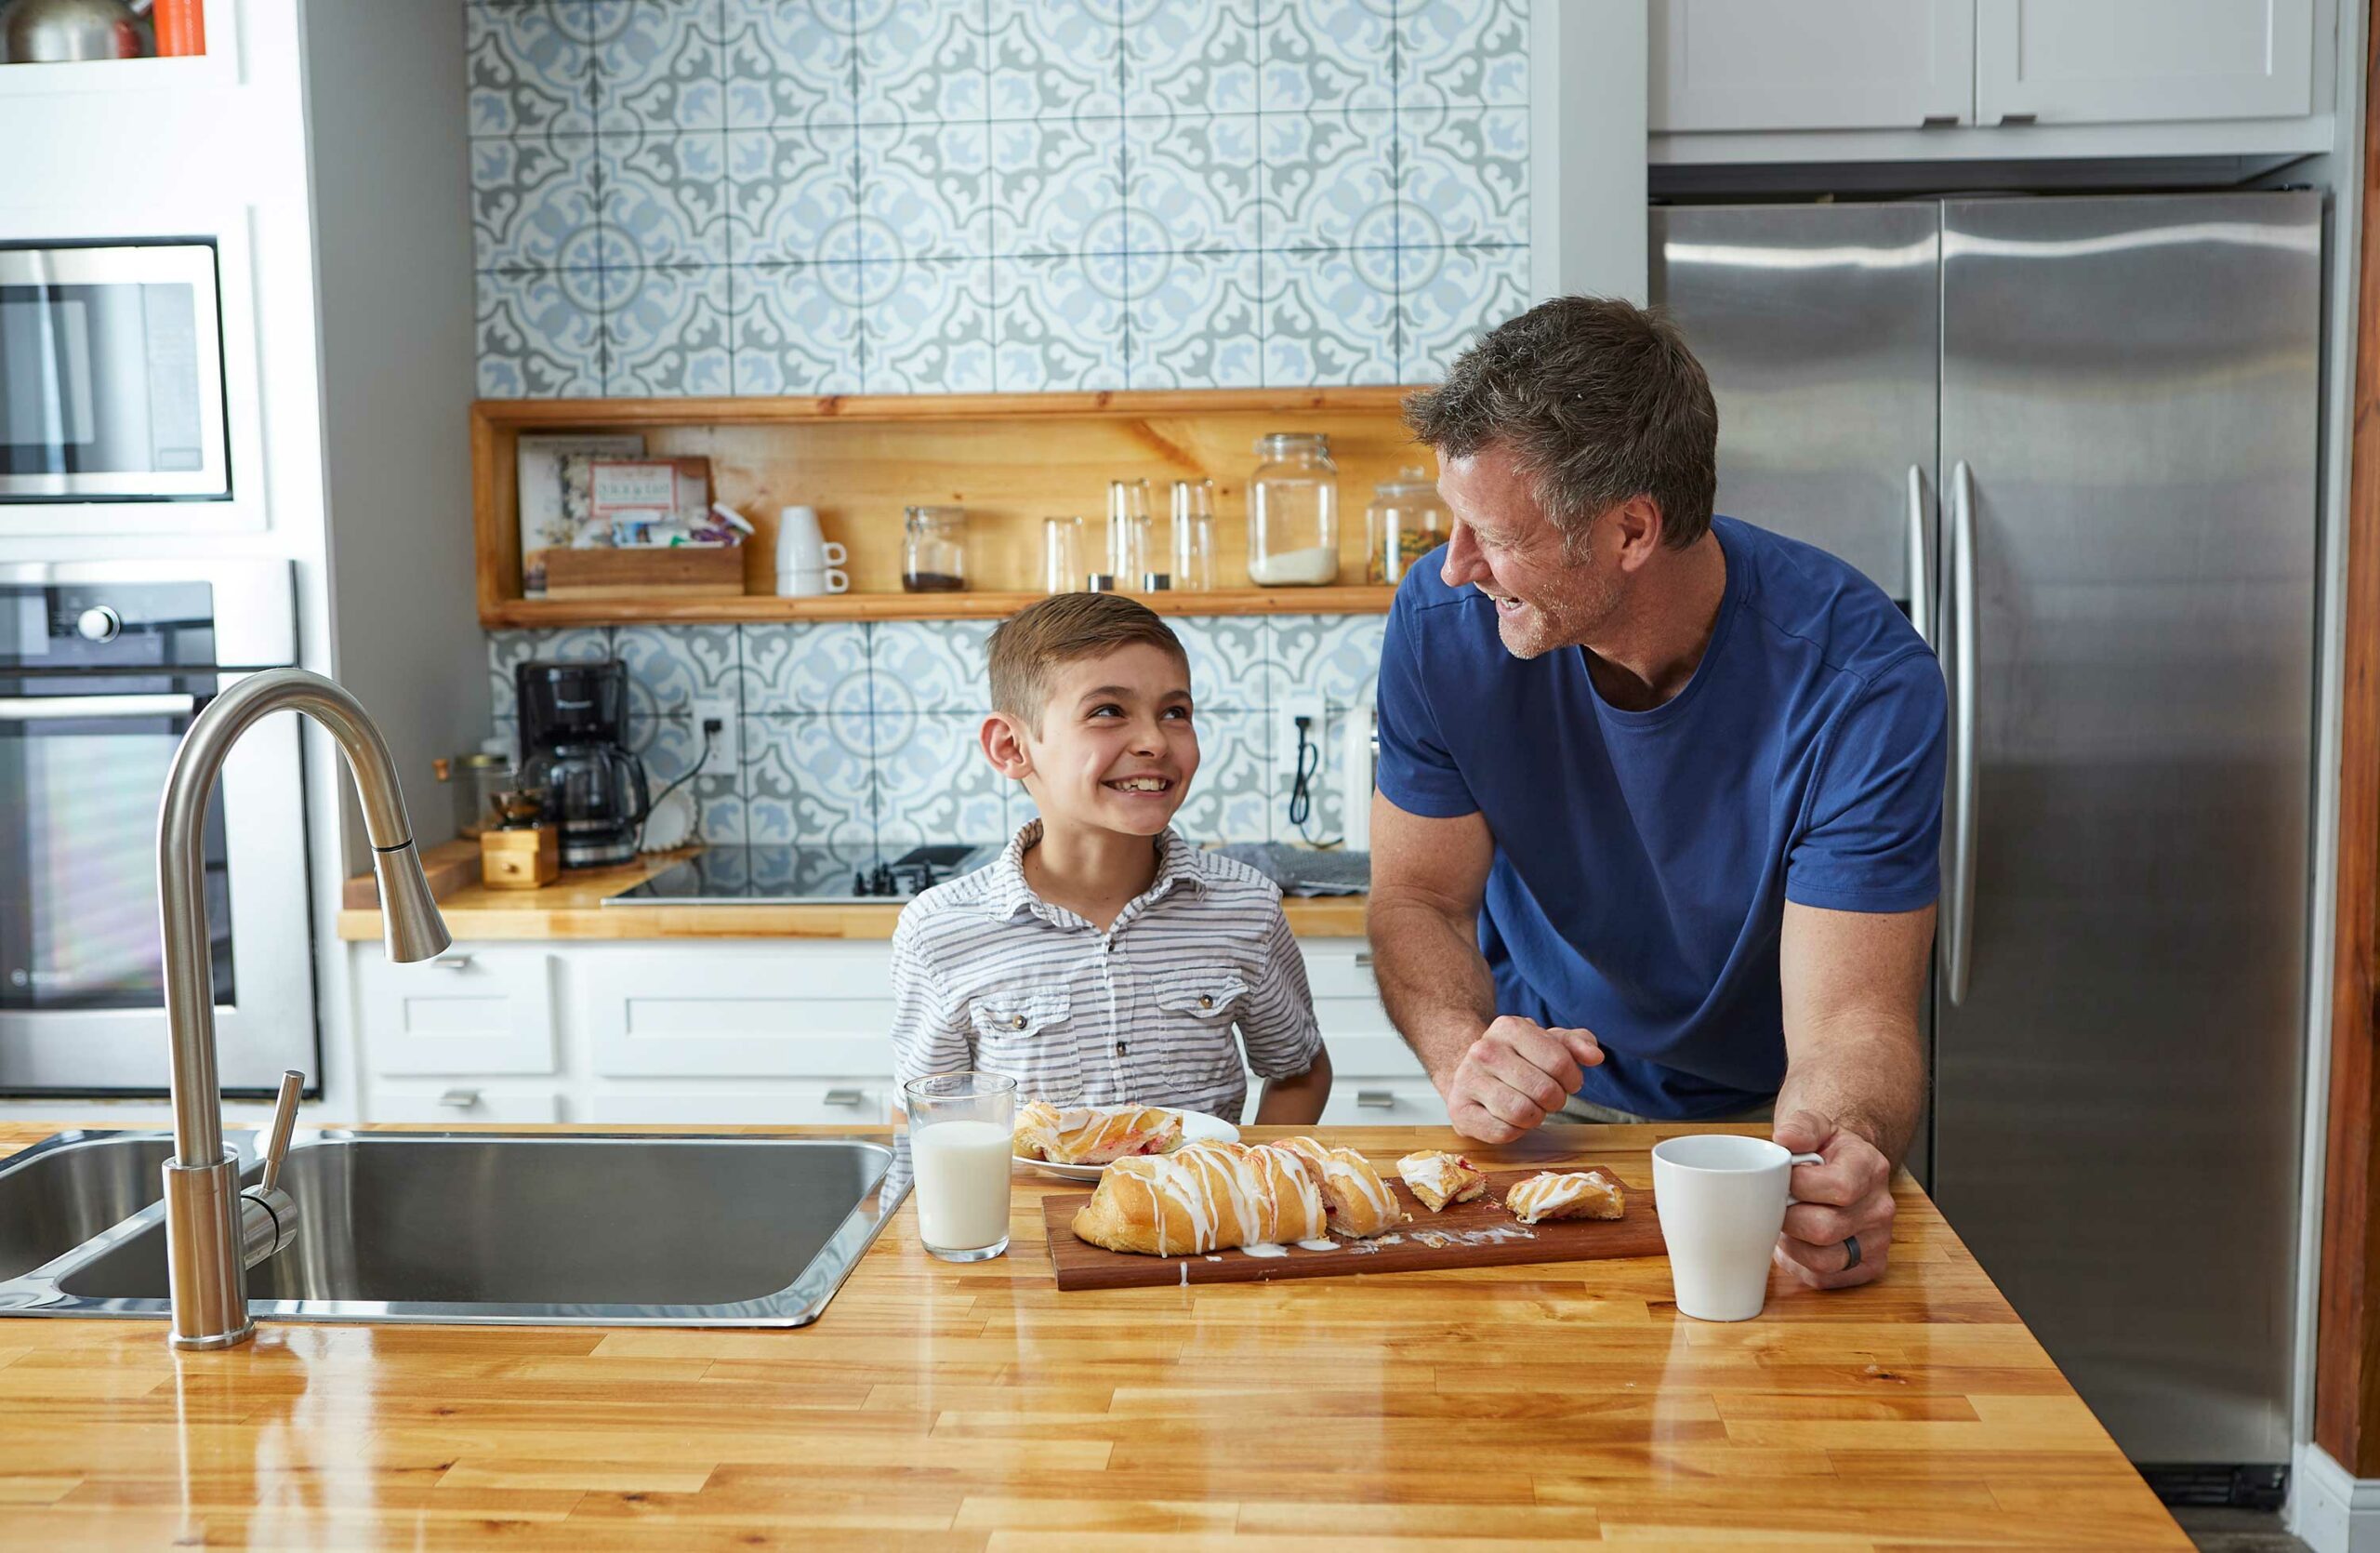 How to Get More Pastries? Dad and son with a Butter Braid Pastry, cut up, on platter and plate in front of them on the kitchen island.